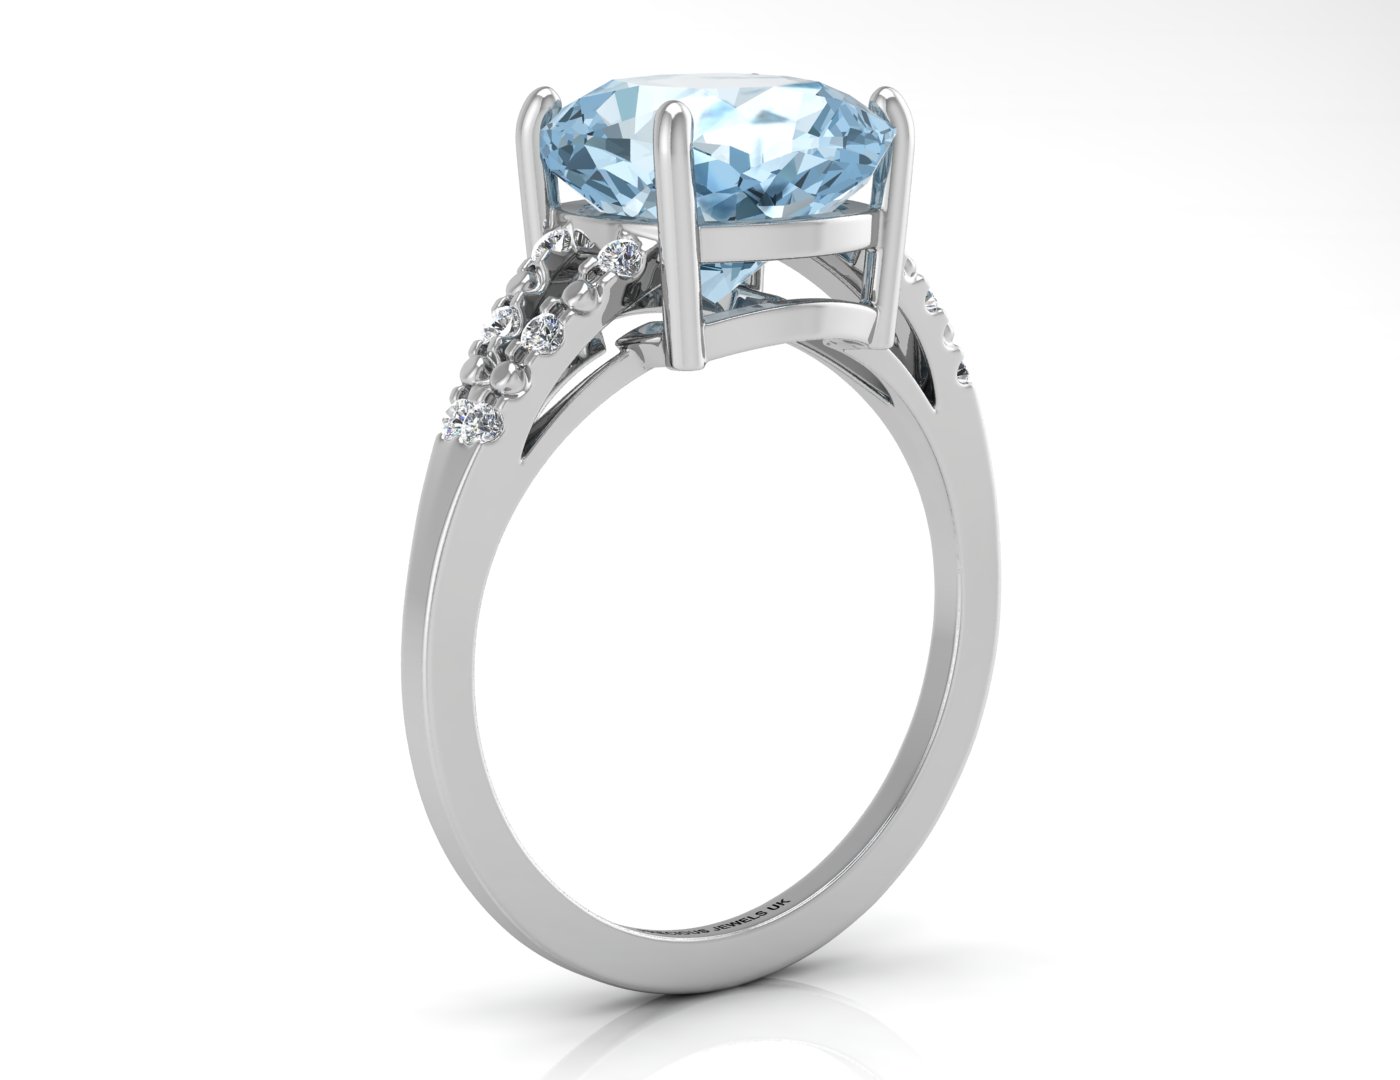 9k White Gold Cushion Cut Blue Topaz With Diamond Set Shoulders Ring - Image 2 of 5